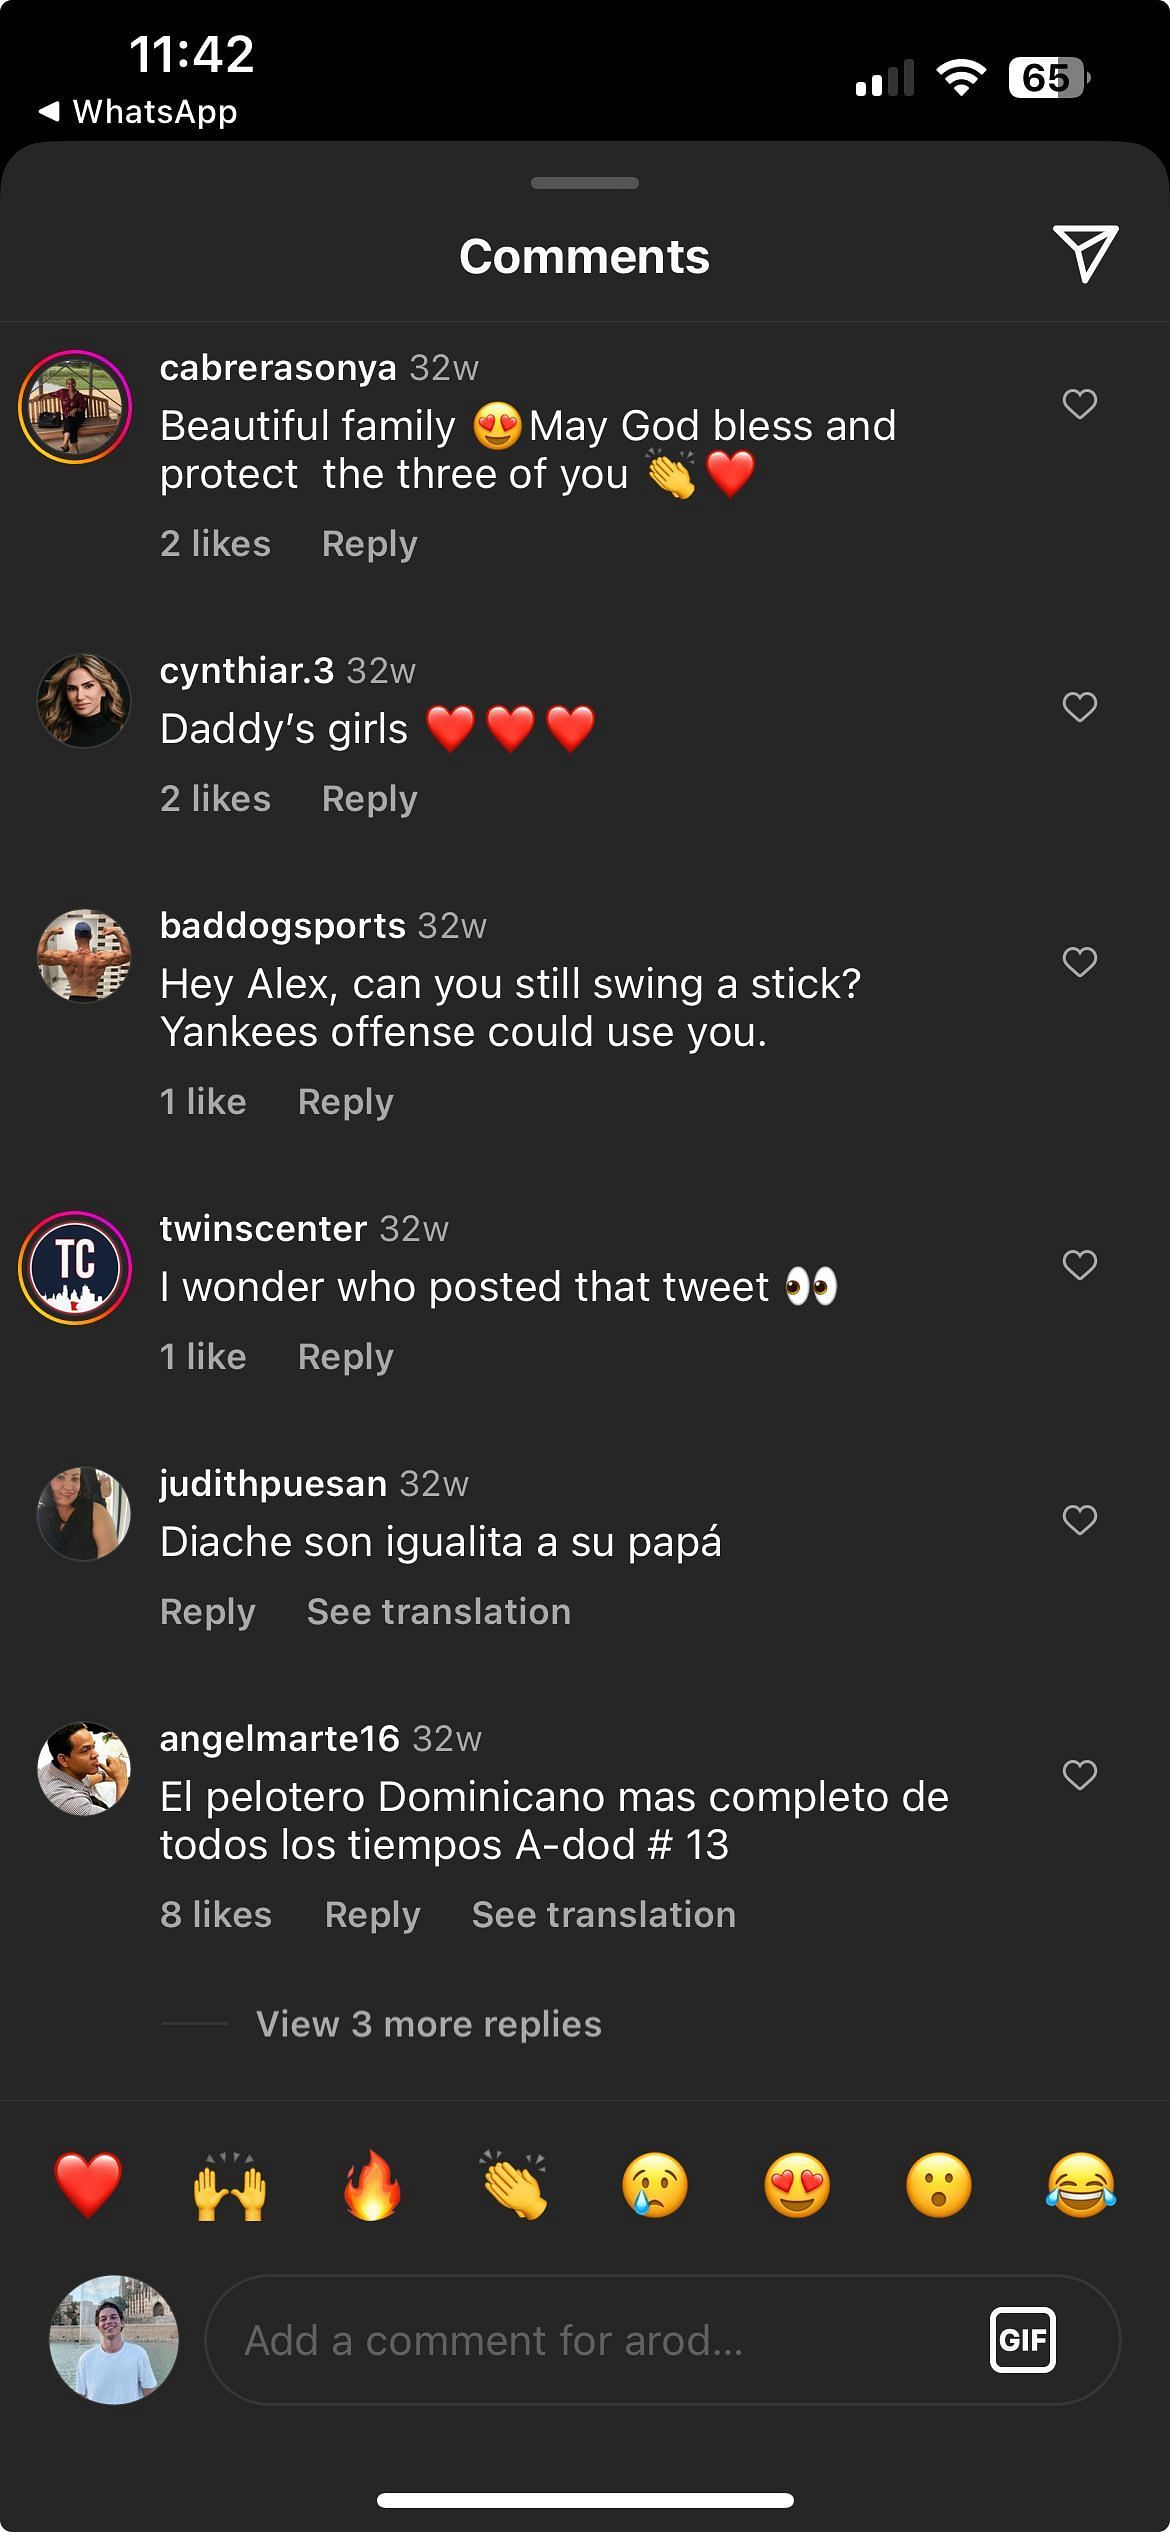 IG comments